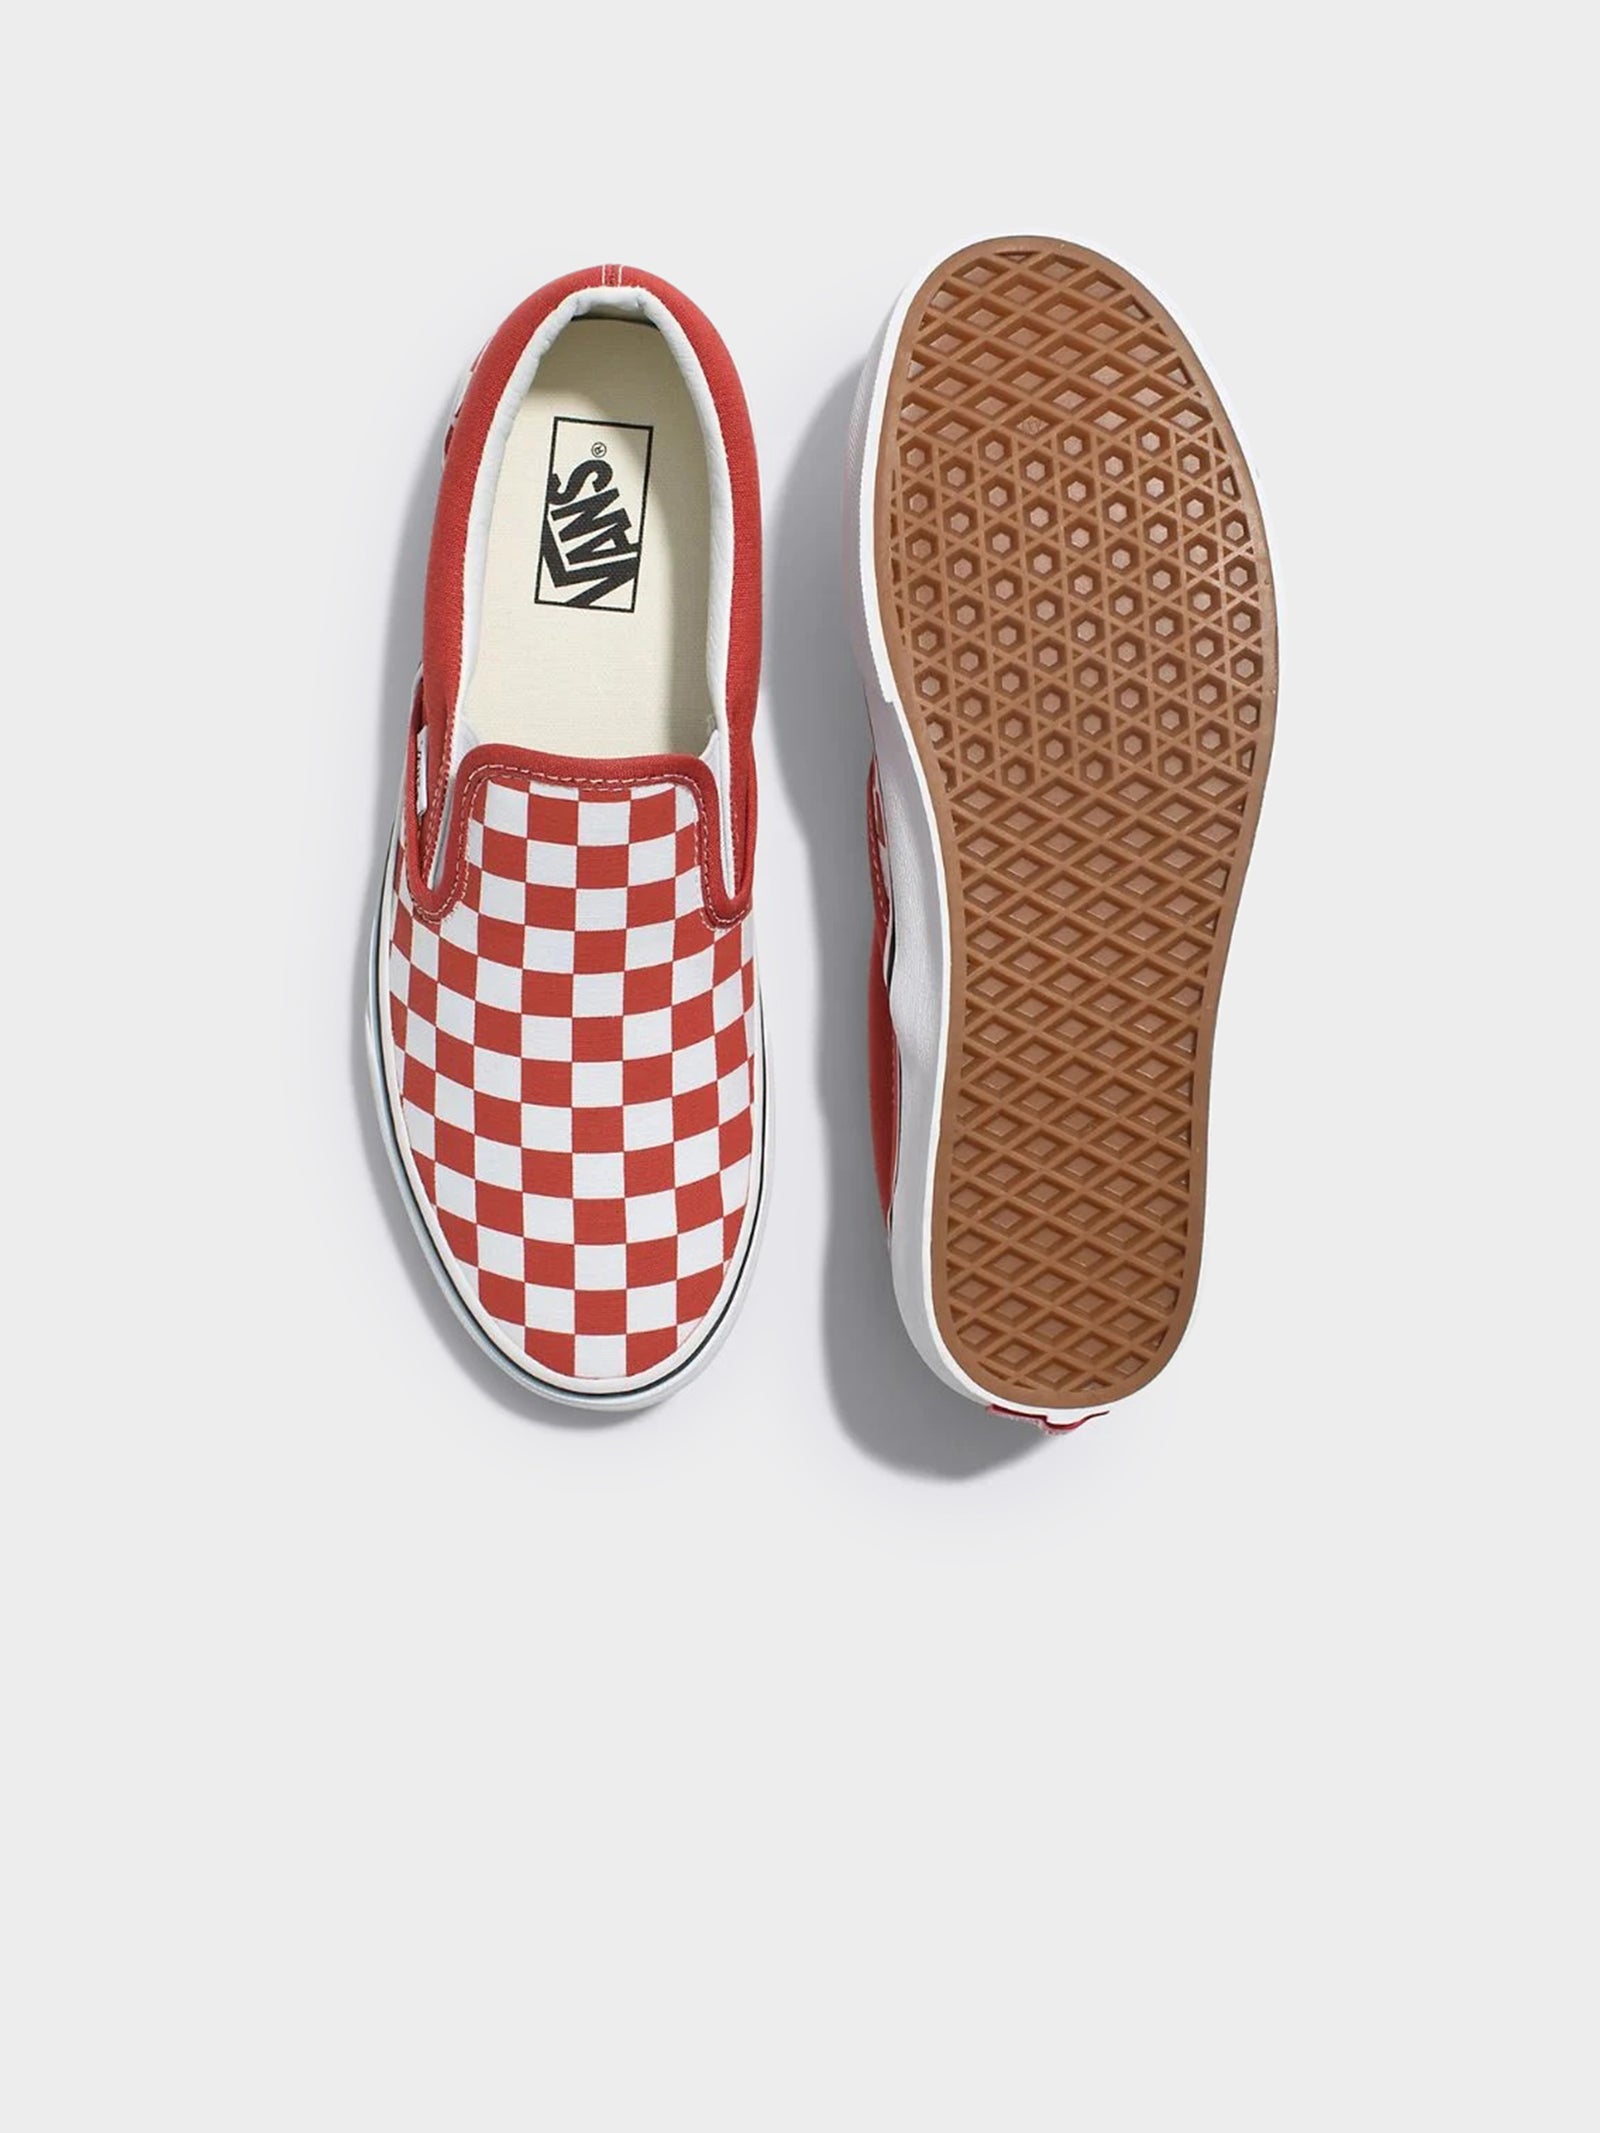 Unisex Classic Slip-On Colour Theory Sneakers in Checkerboard Bossa Nova Red